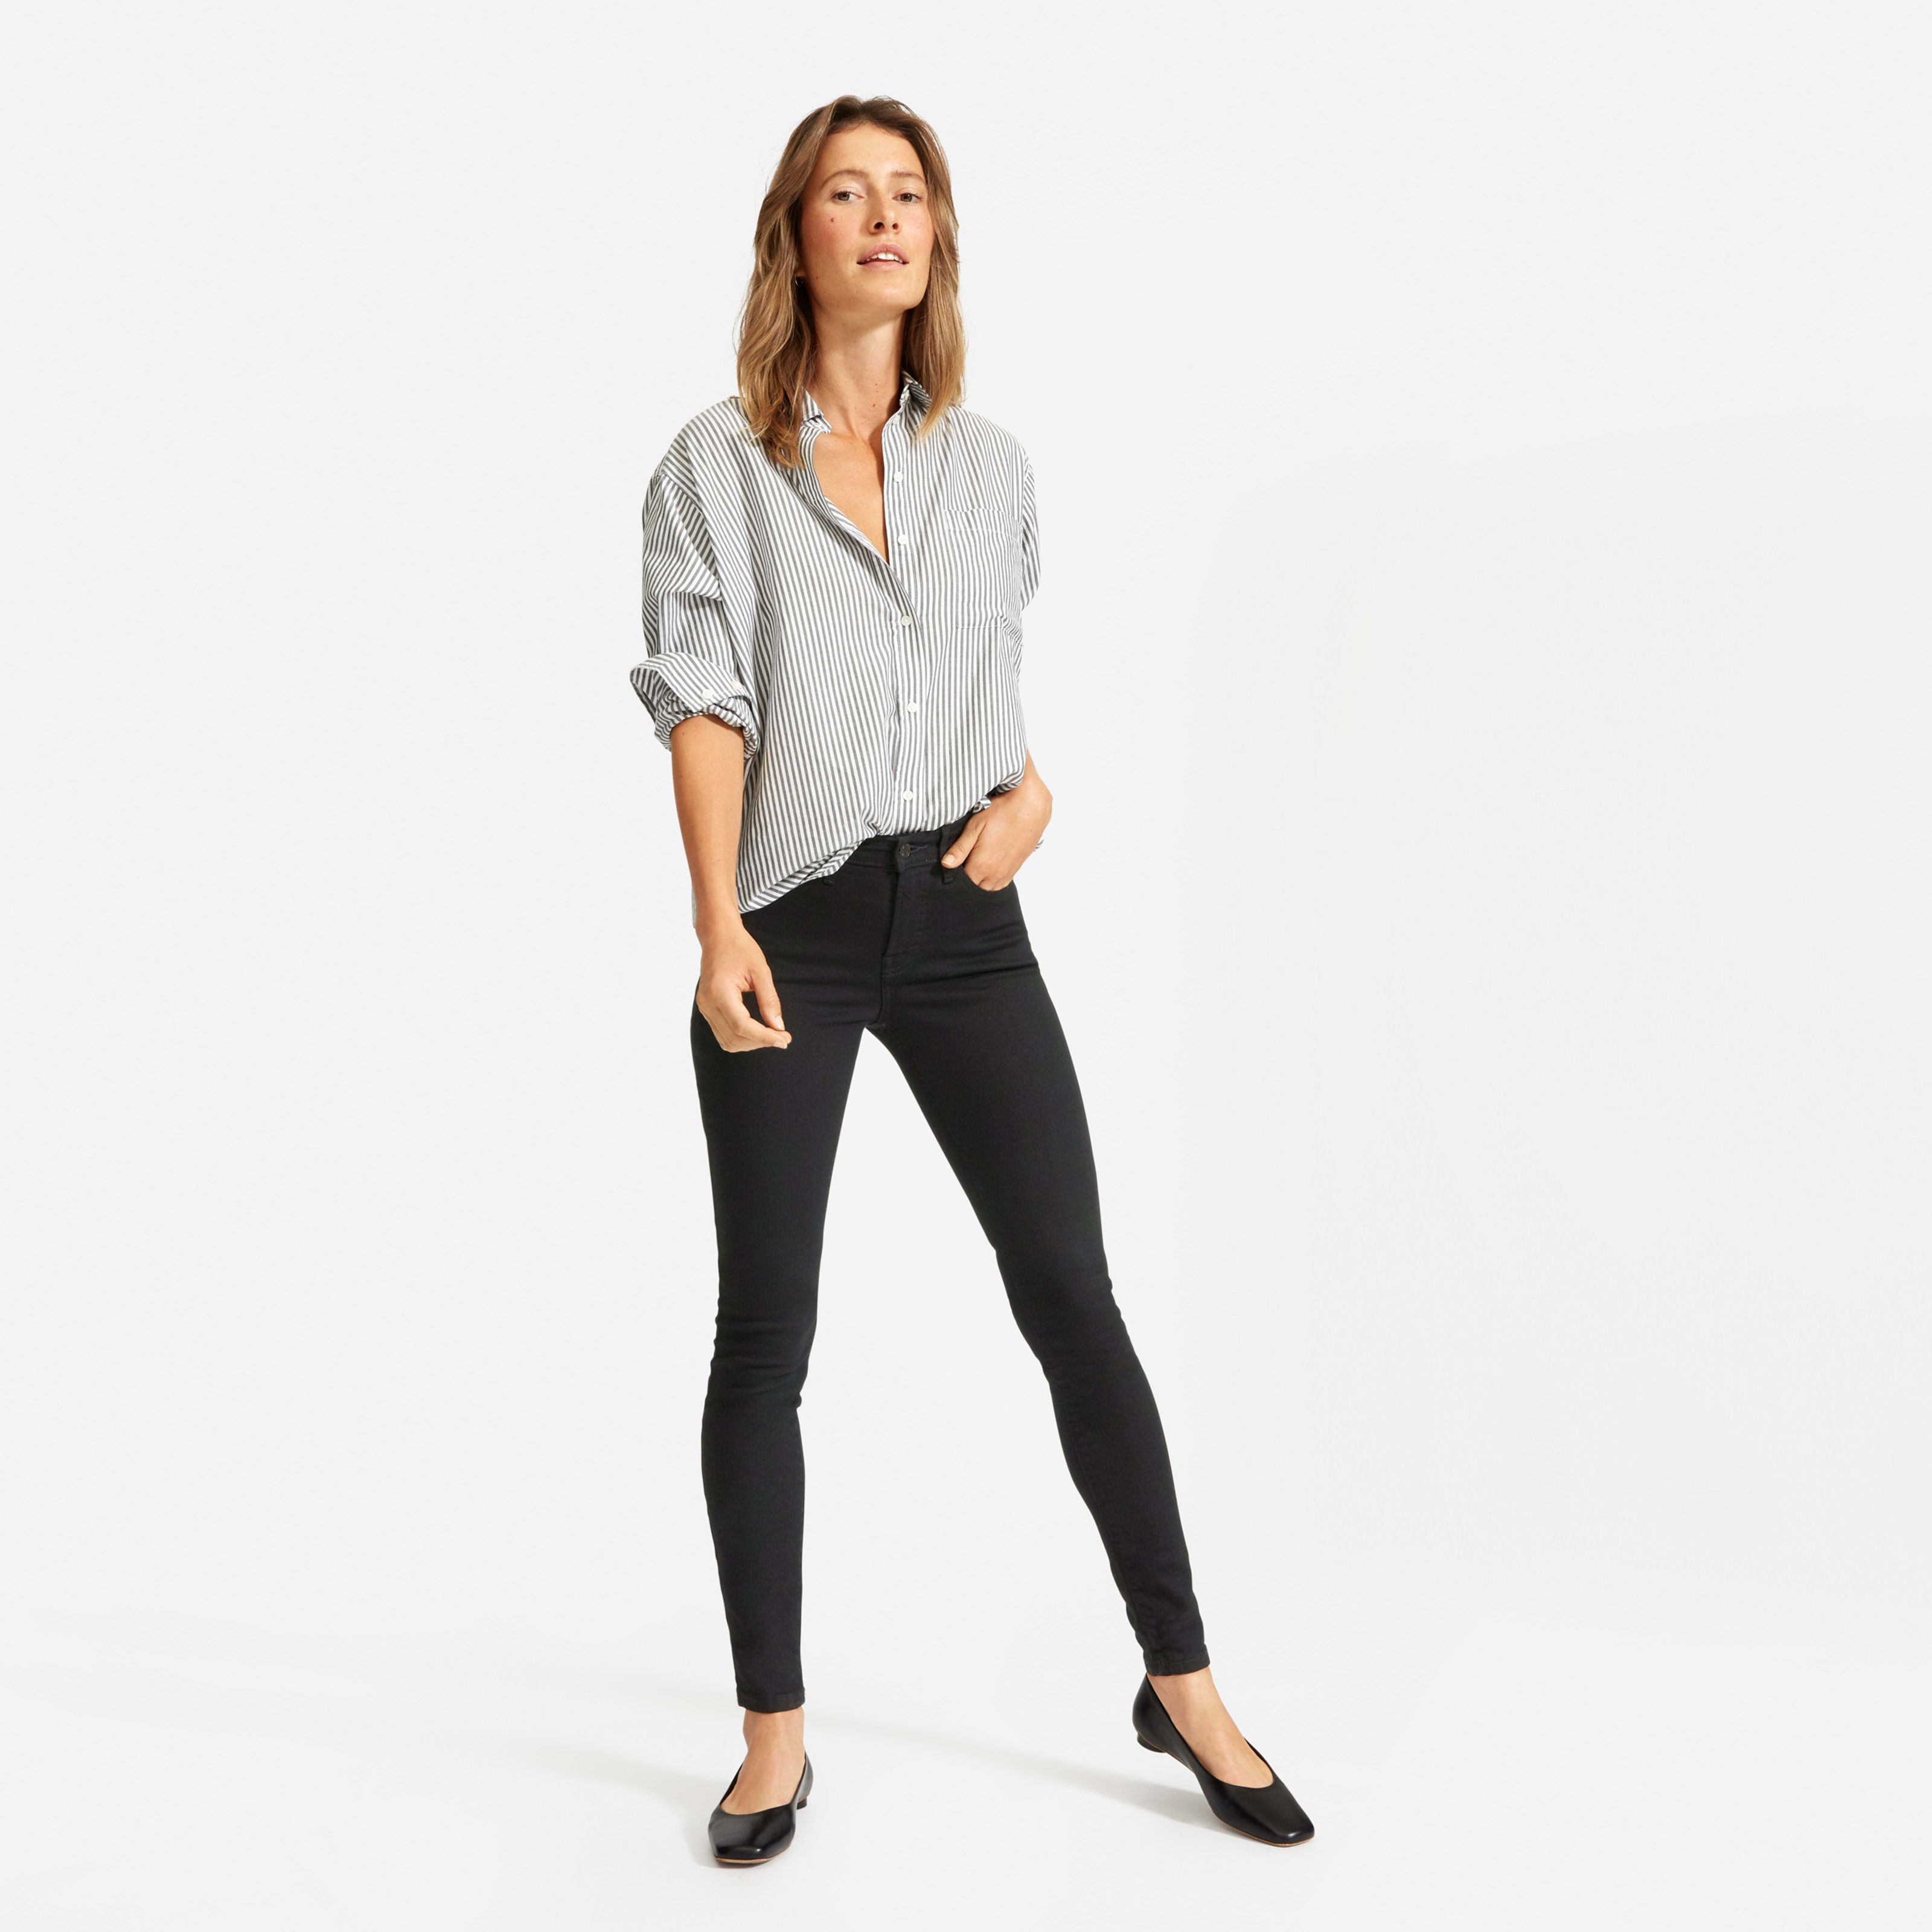 Women's Authentic Stretch Mid-Rise Skinny by Everlane in Black, Size 29 | Everlane